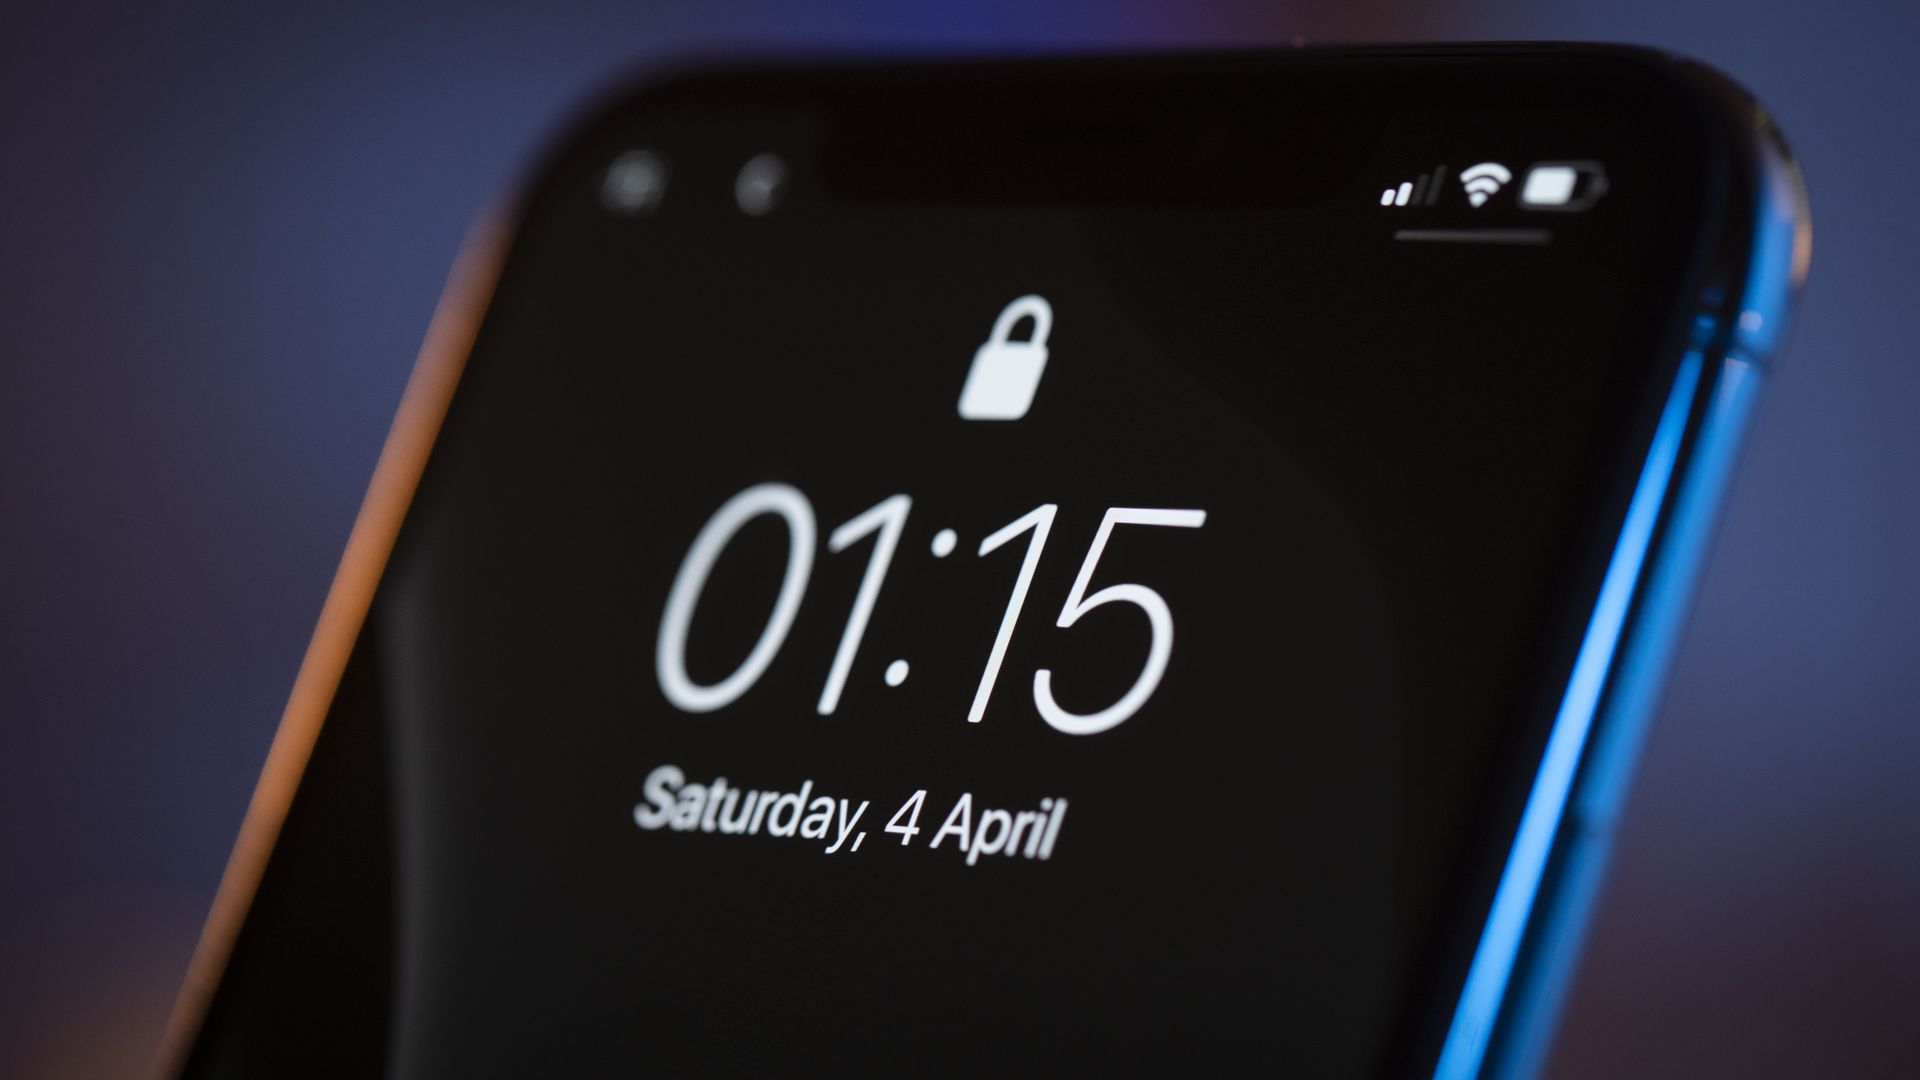 The lock screen is seen on an iPhone 11 Pro Max.